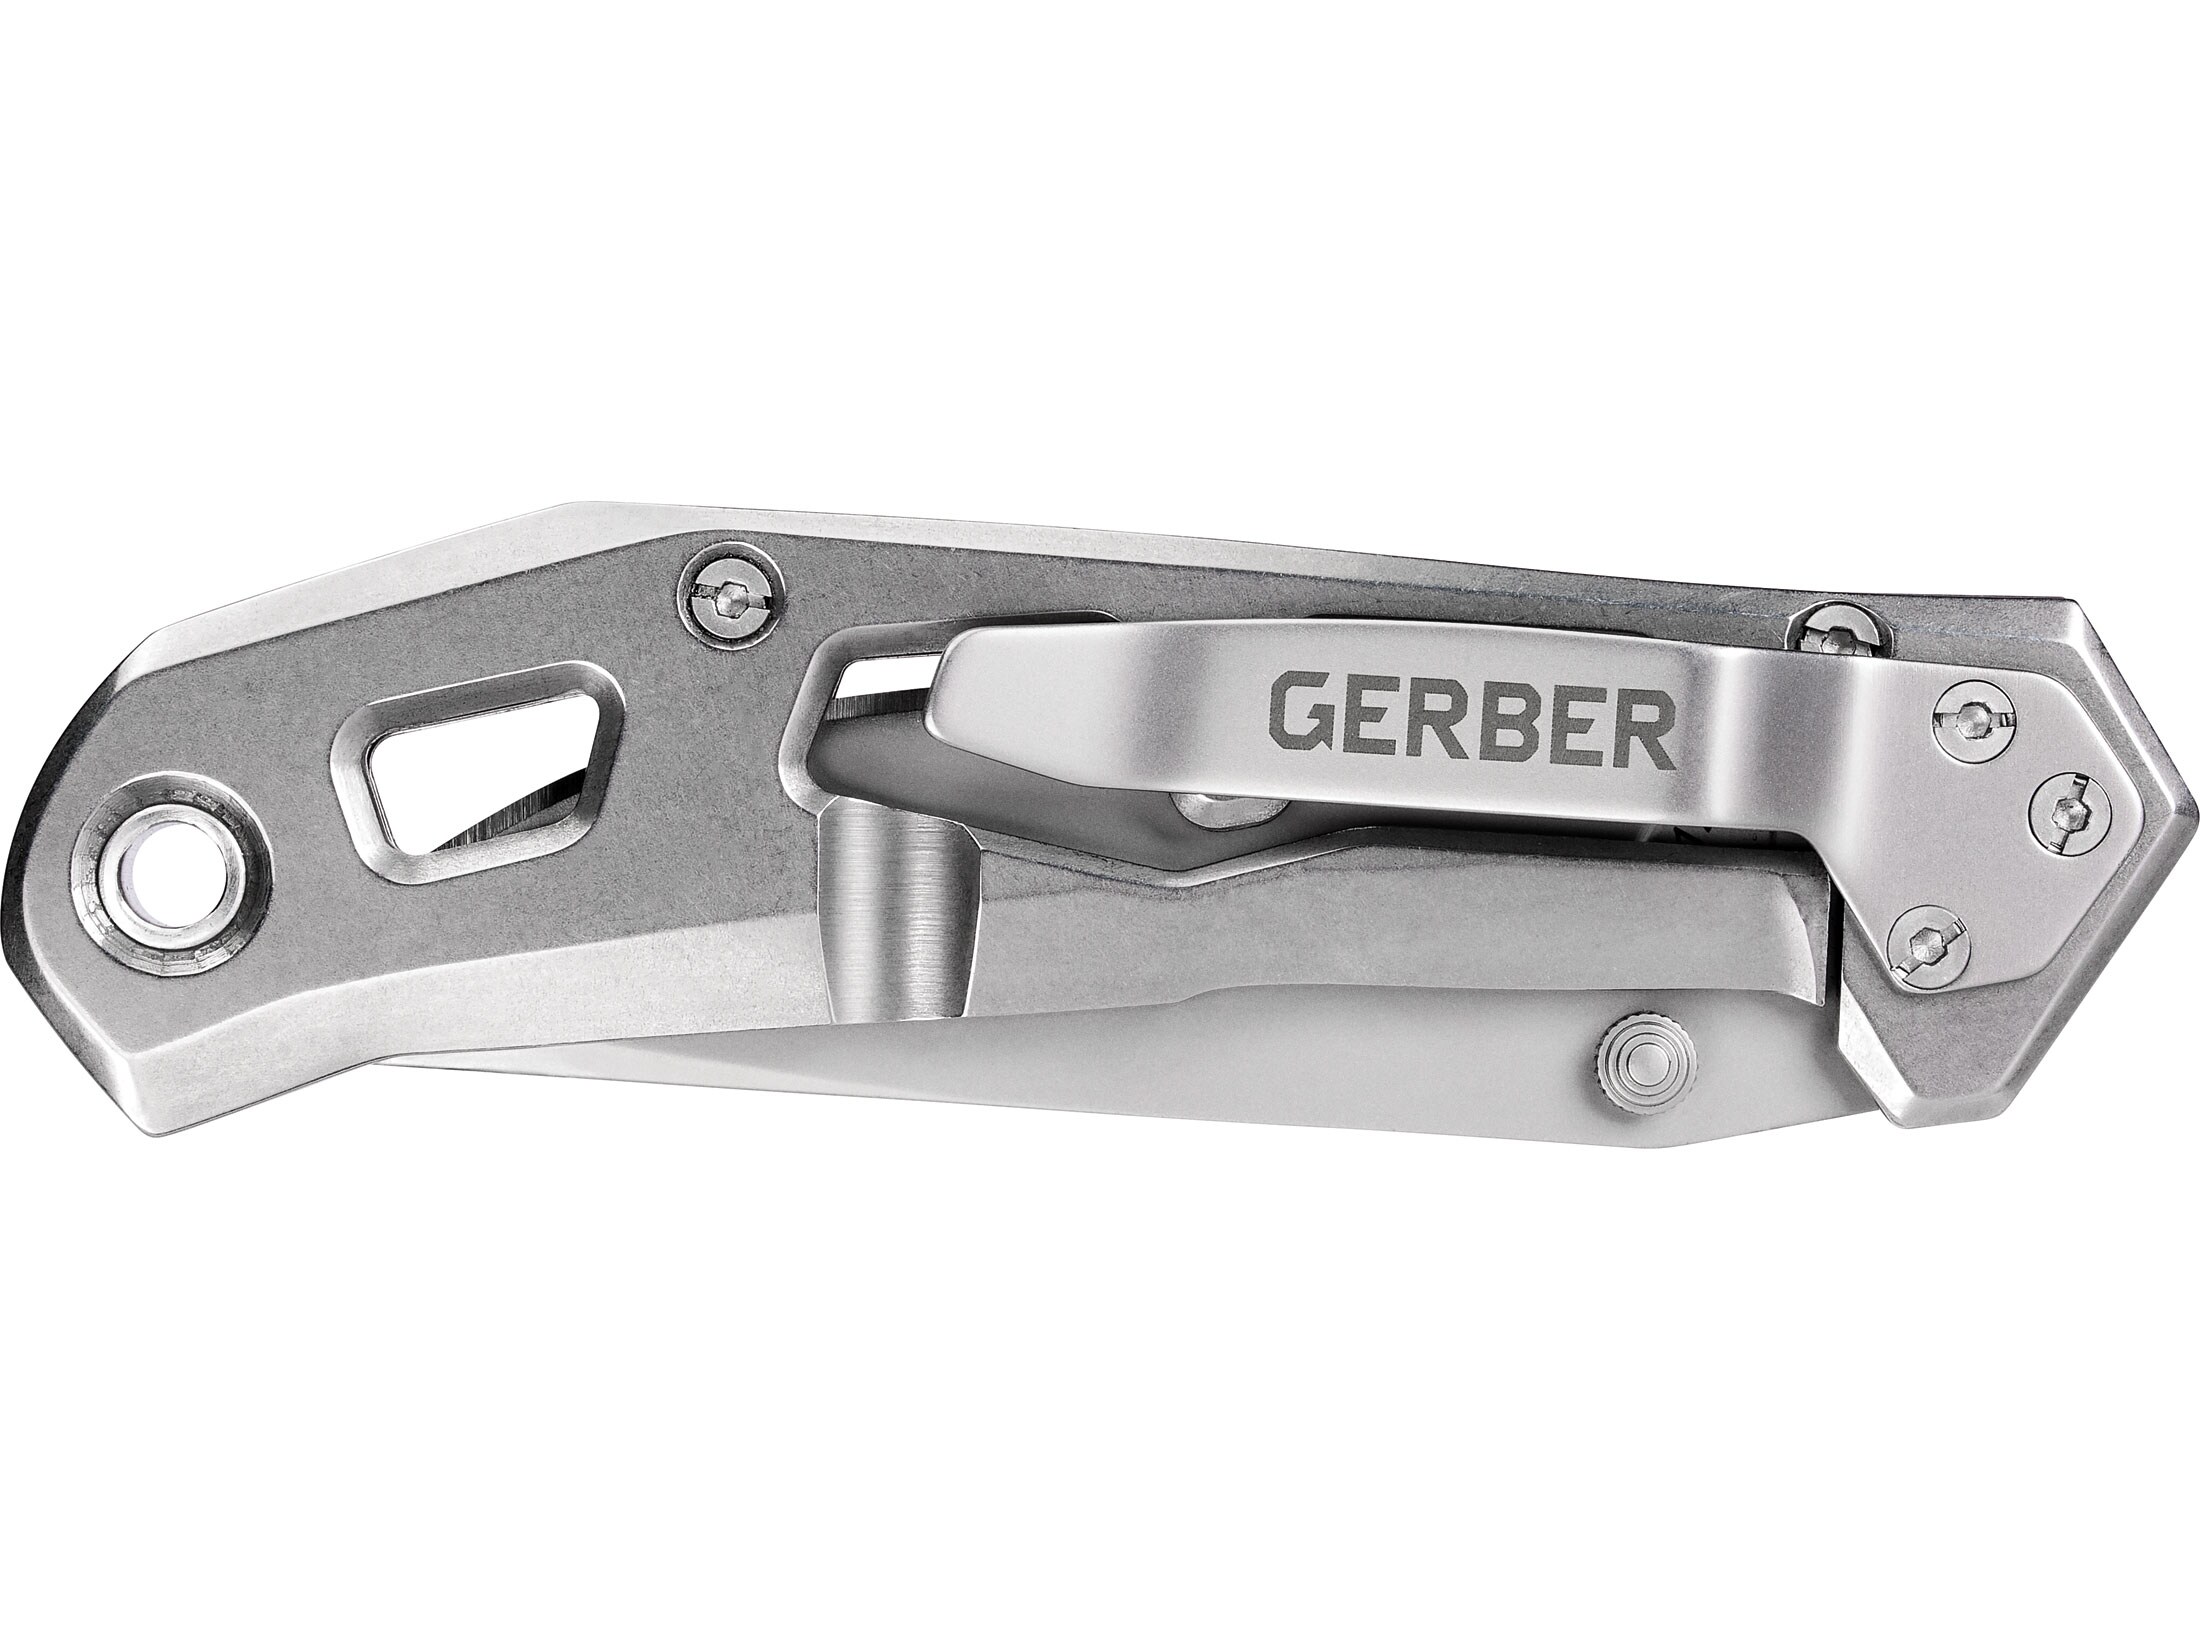 Gerber Airlift Folding Knife 2.8″ Clip Point 5Cr13 Stainless Steel Blade Stainless Steel Handle For Sale